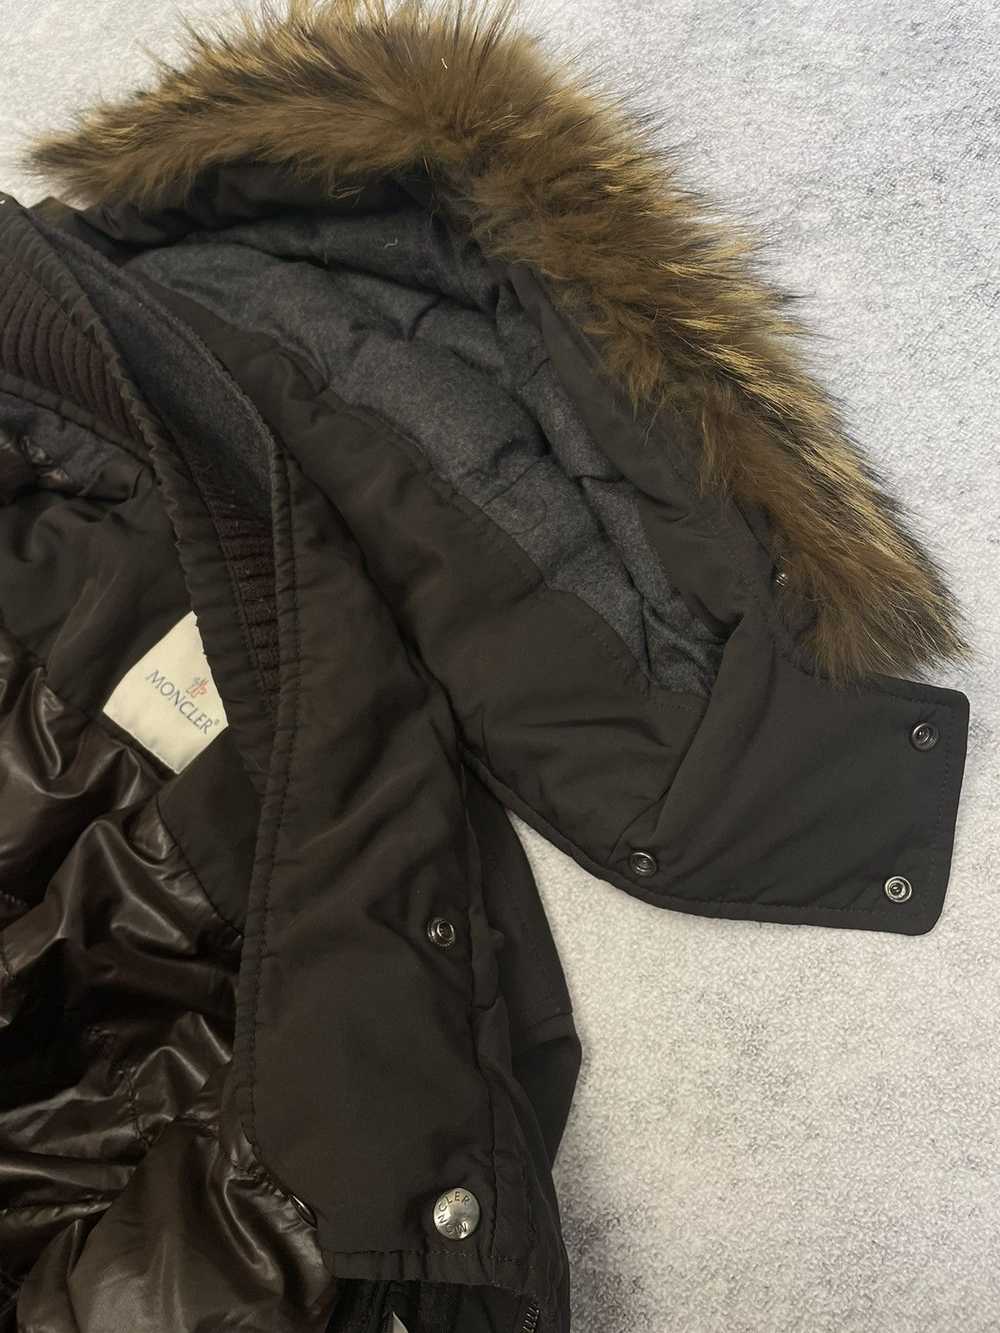 Moncler Moncler fabrice Parka Puffer Brown hooded… - image 11